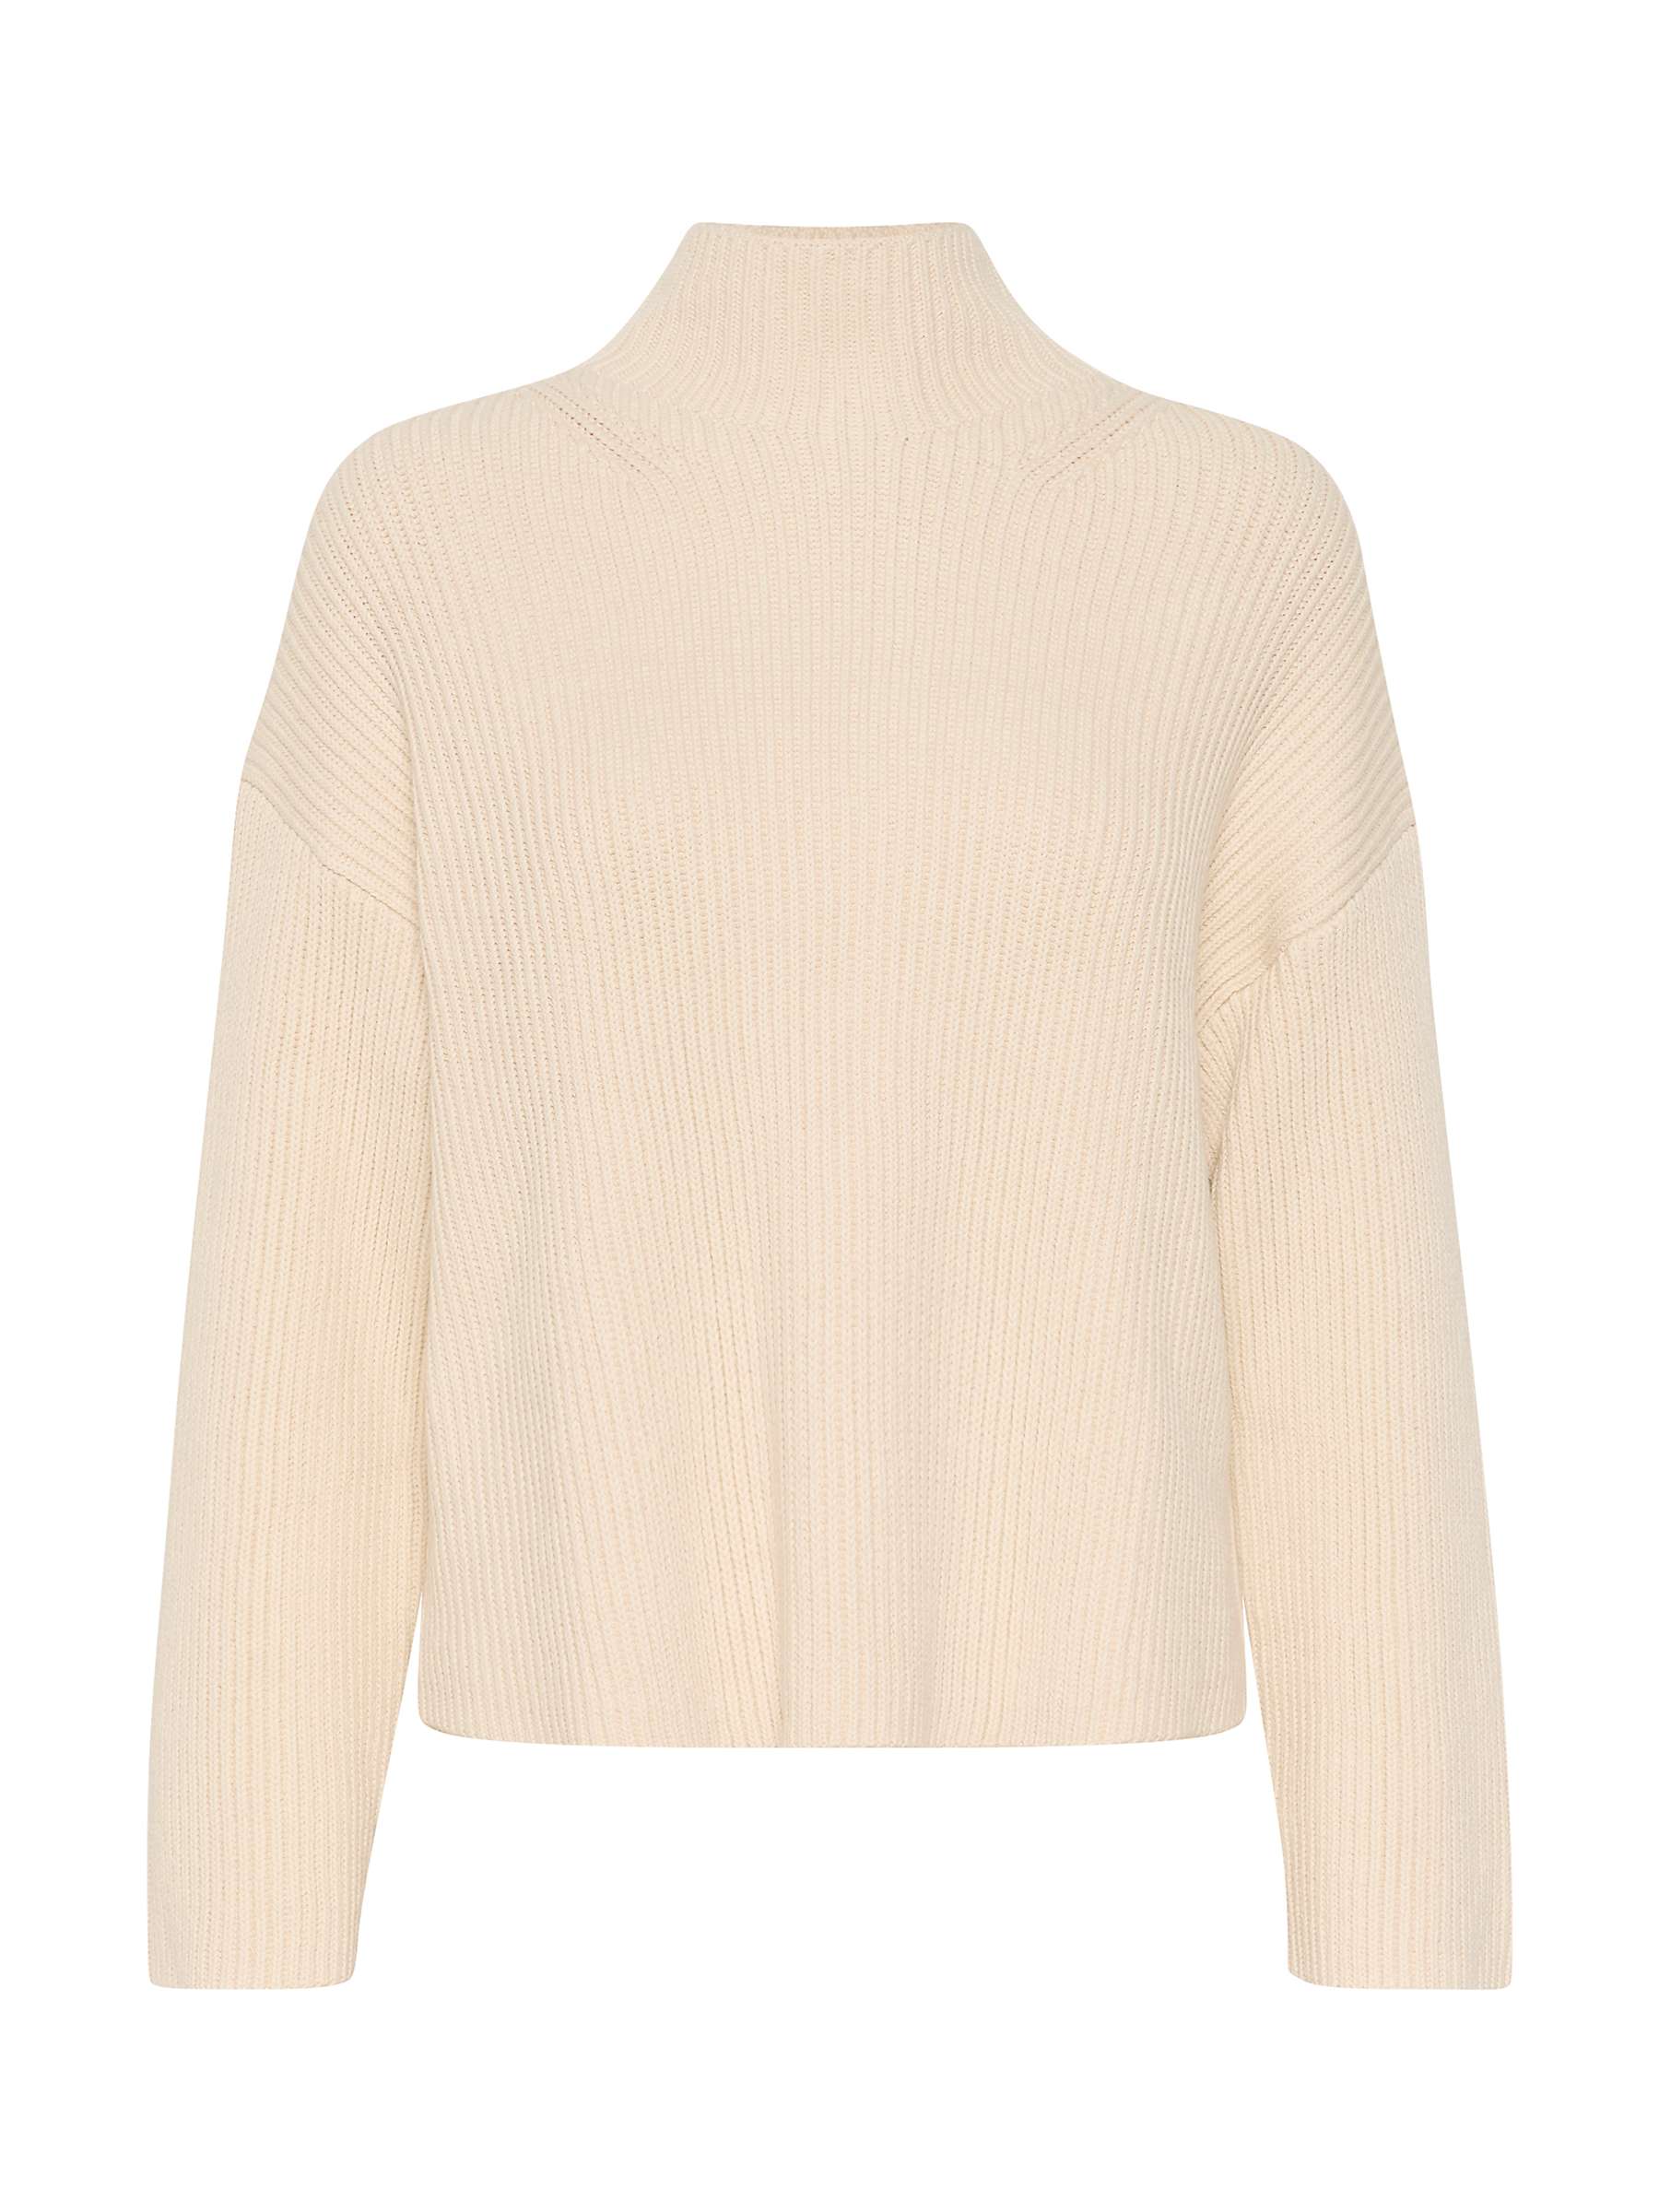 Buy Part Two Angeline Rib Knit Jumper Online at johnlewis.com